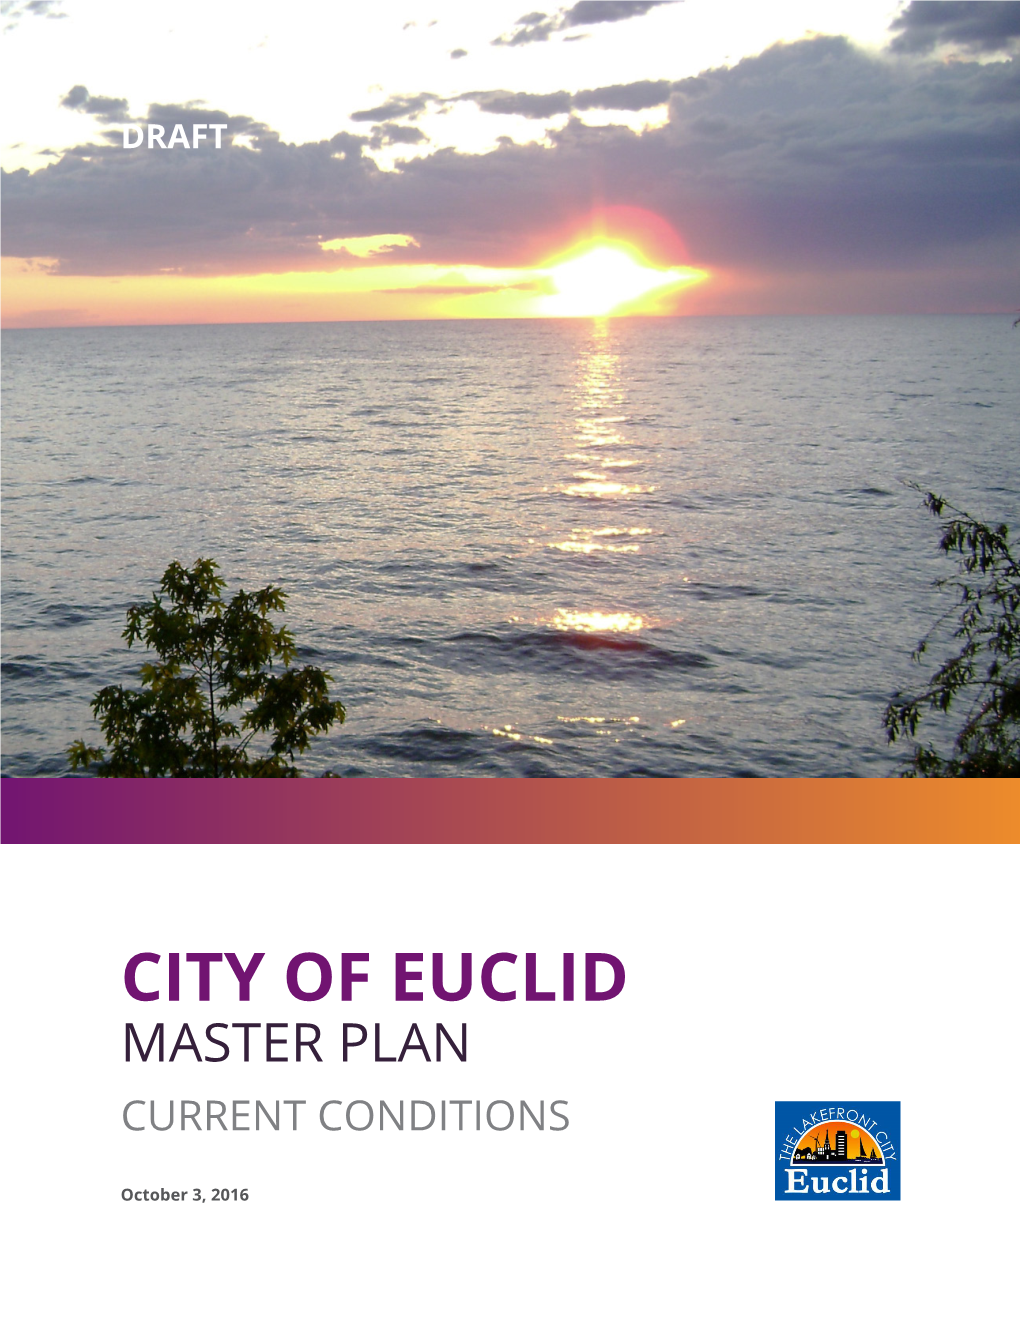 City of Euclid Master Plan Current Conditions